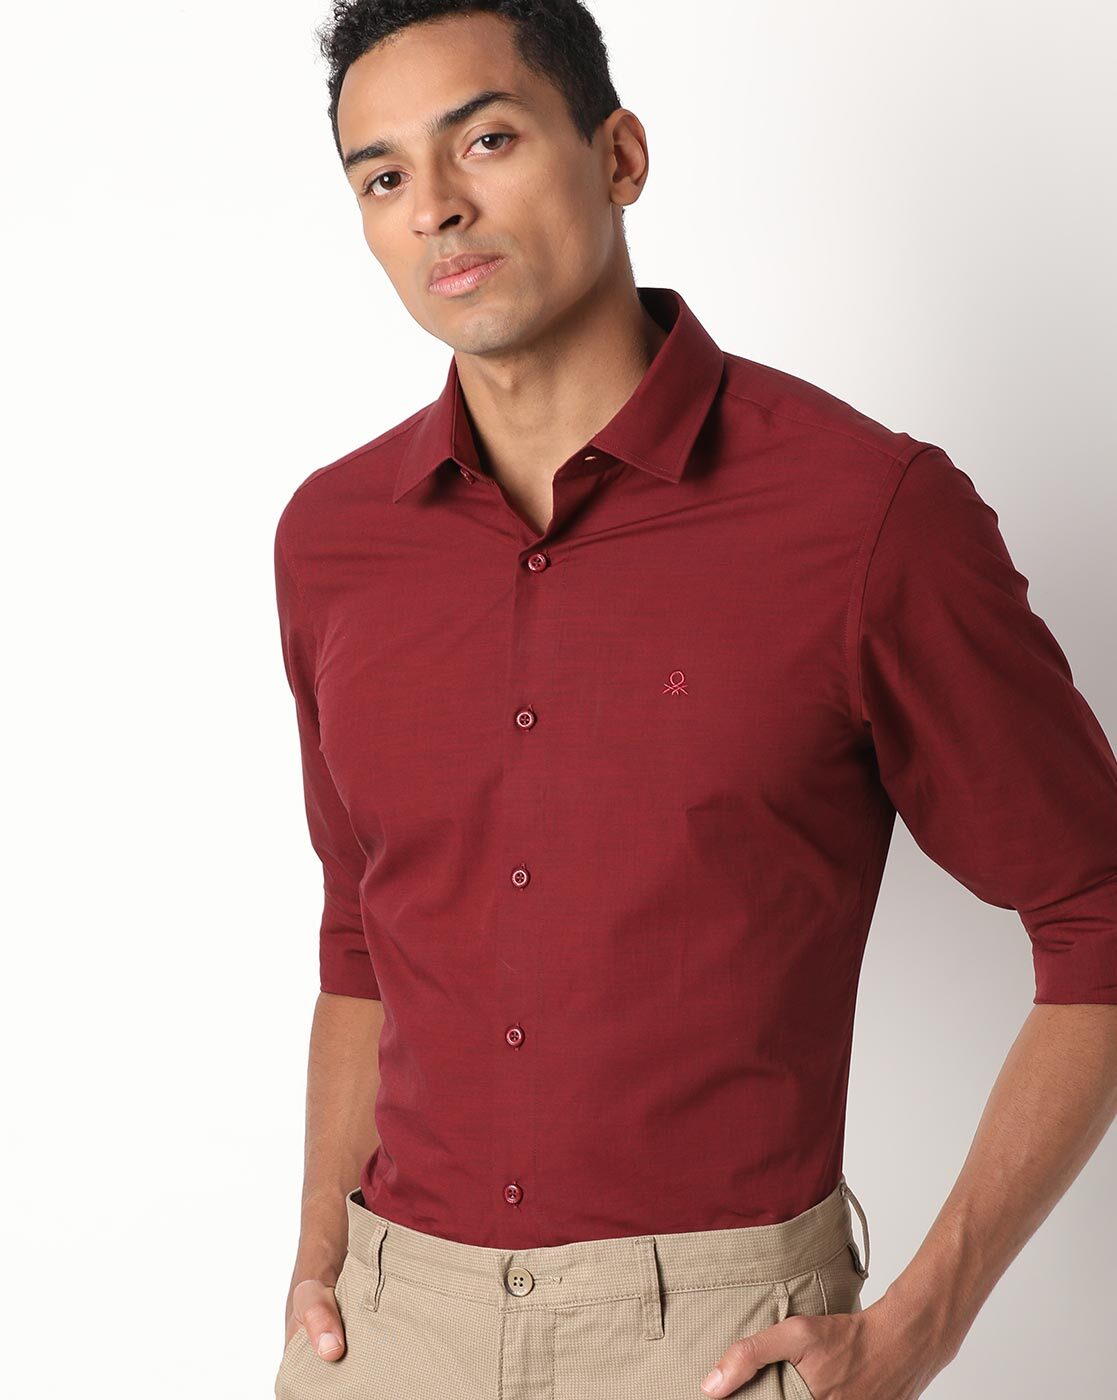 What Color Pants Goes With Maroon Shirt Men and Women